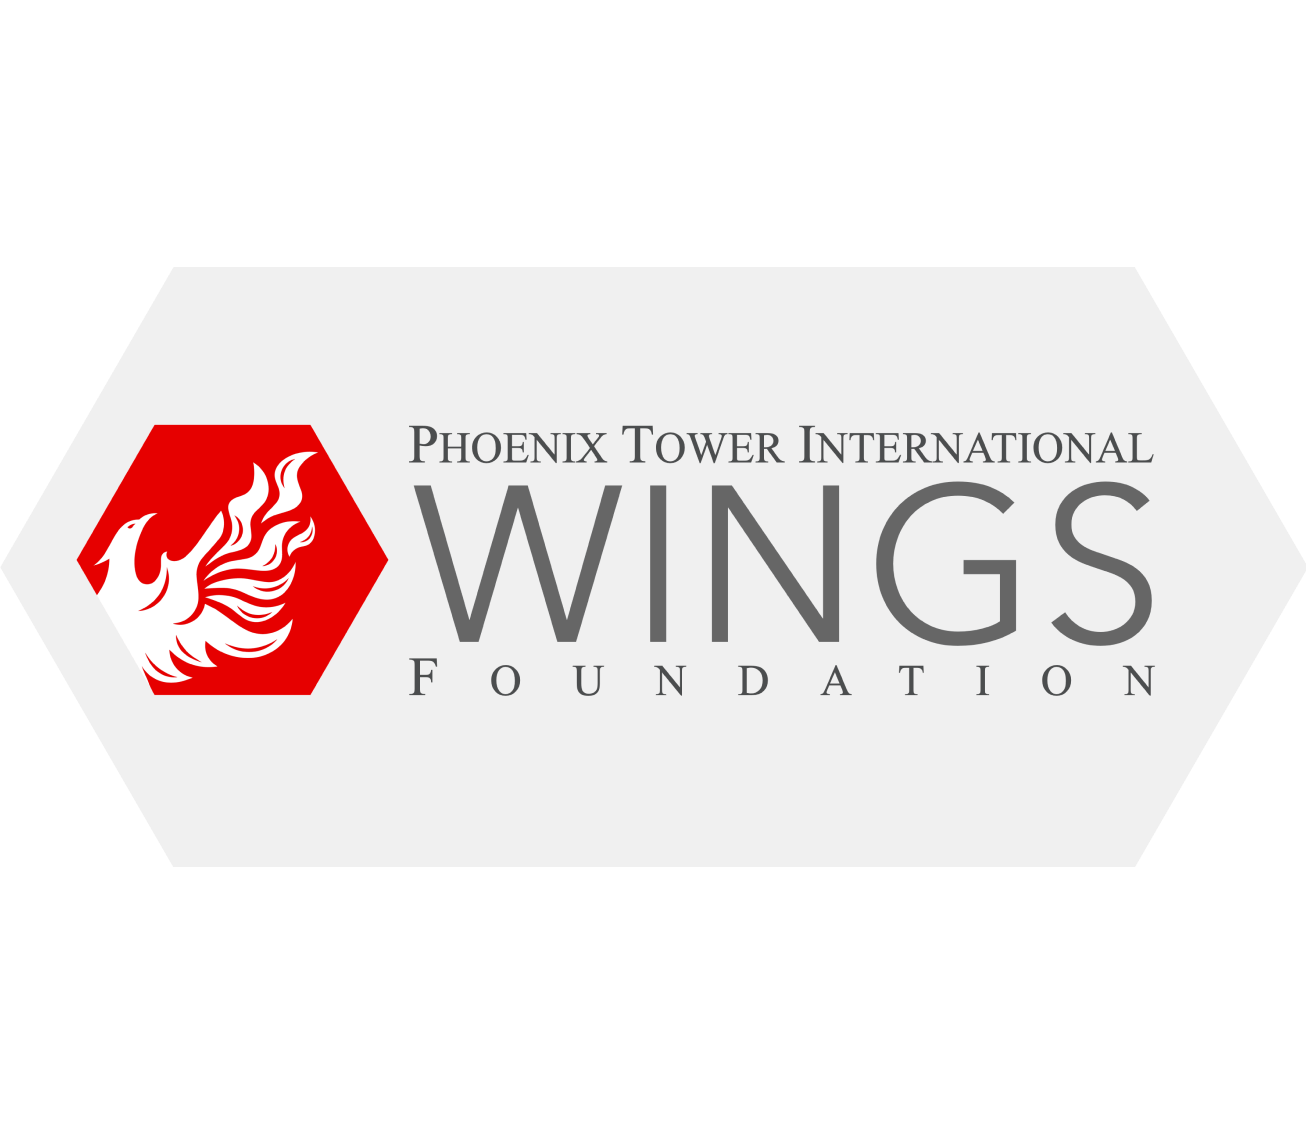 Wings Foundation